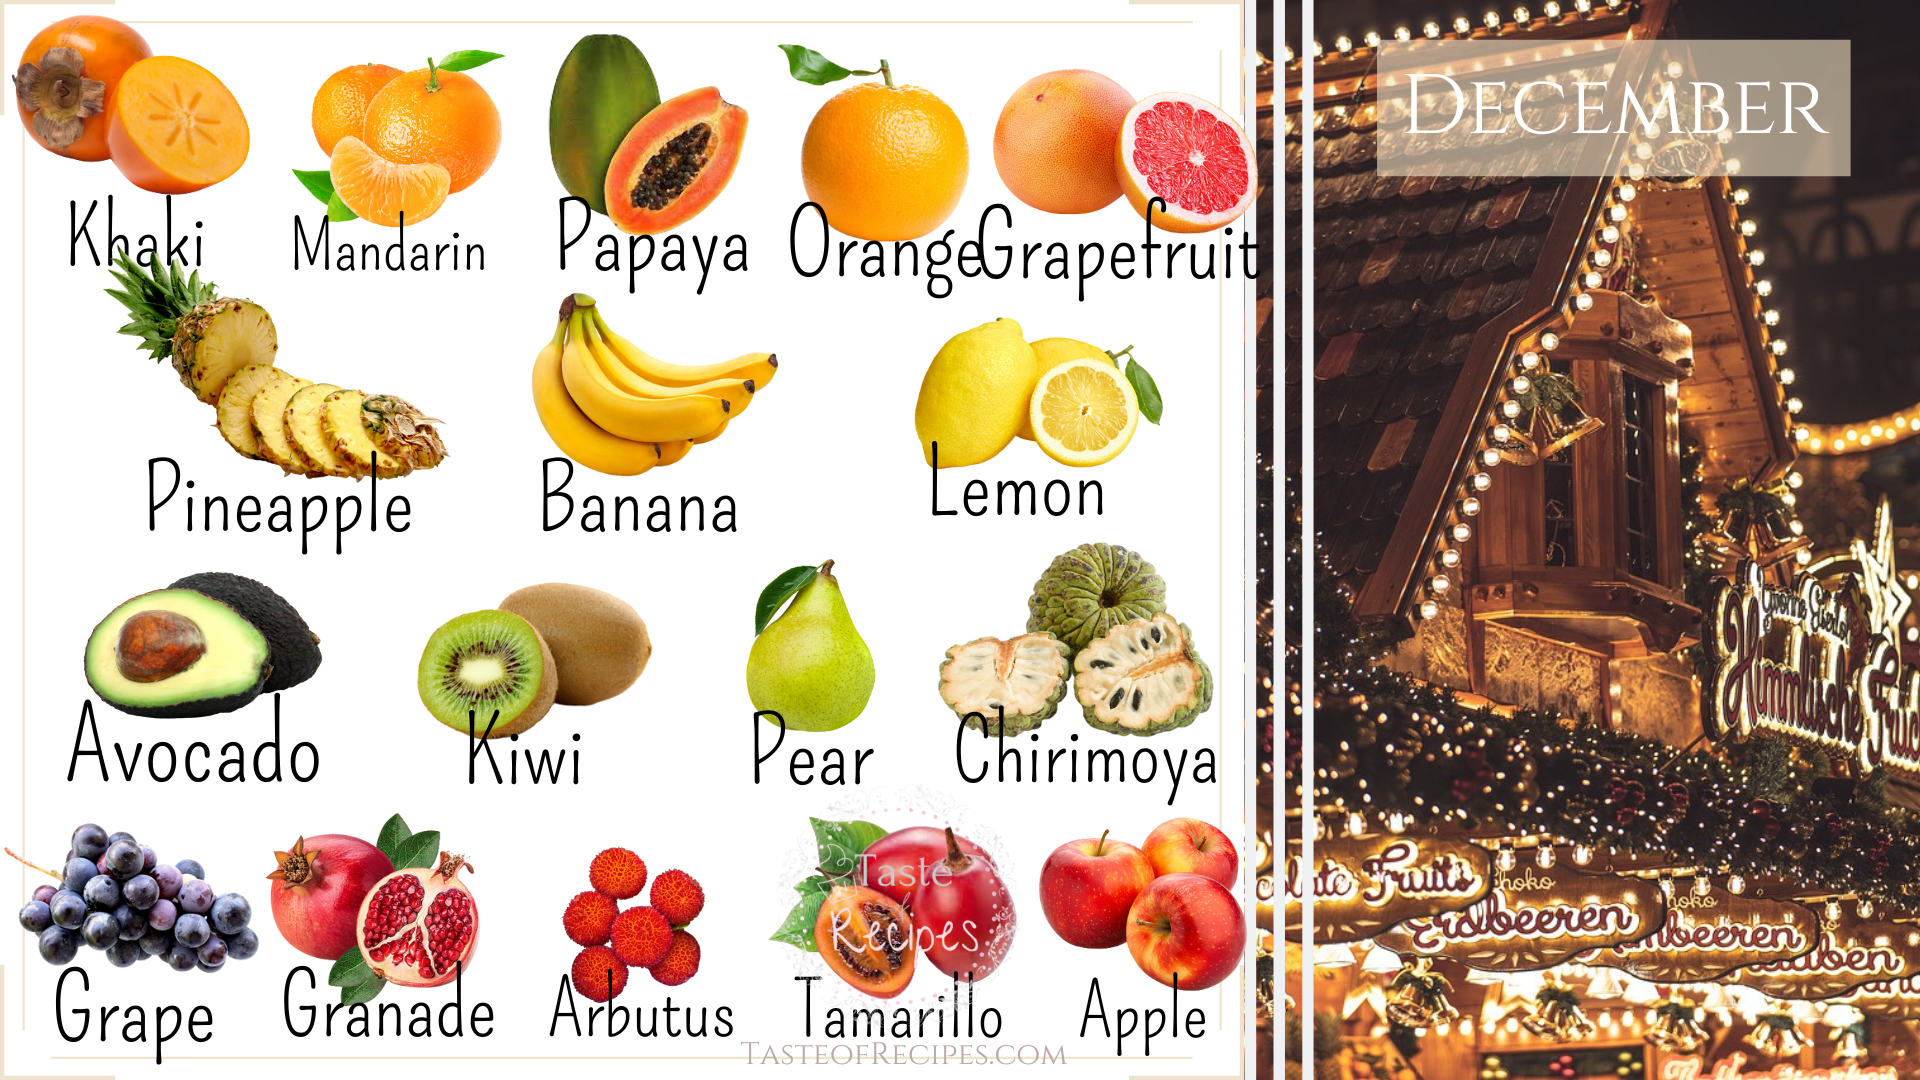 Seasonal Fruits, Know the fruits that are in their optimum season month by month with this annual calendar.